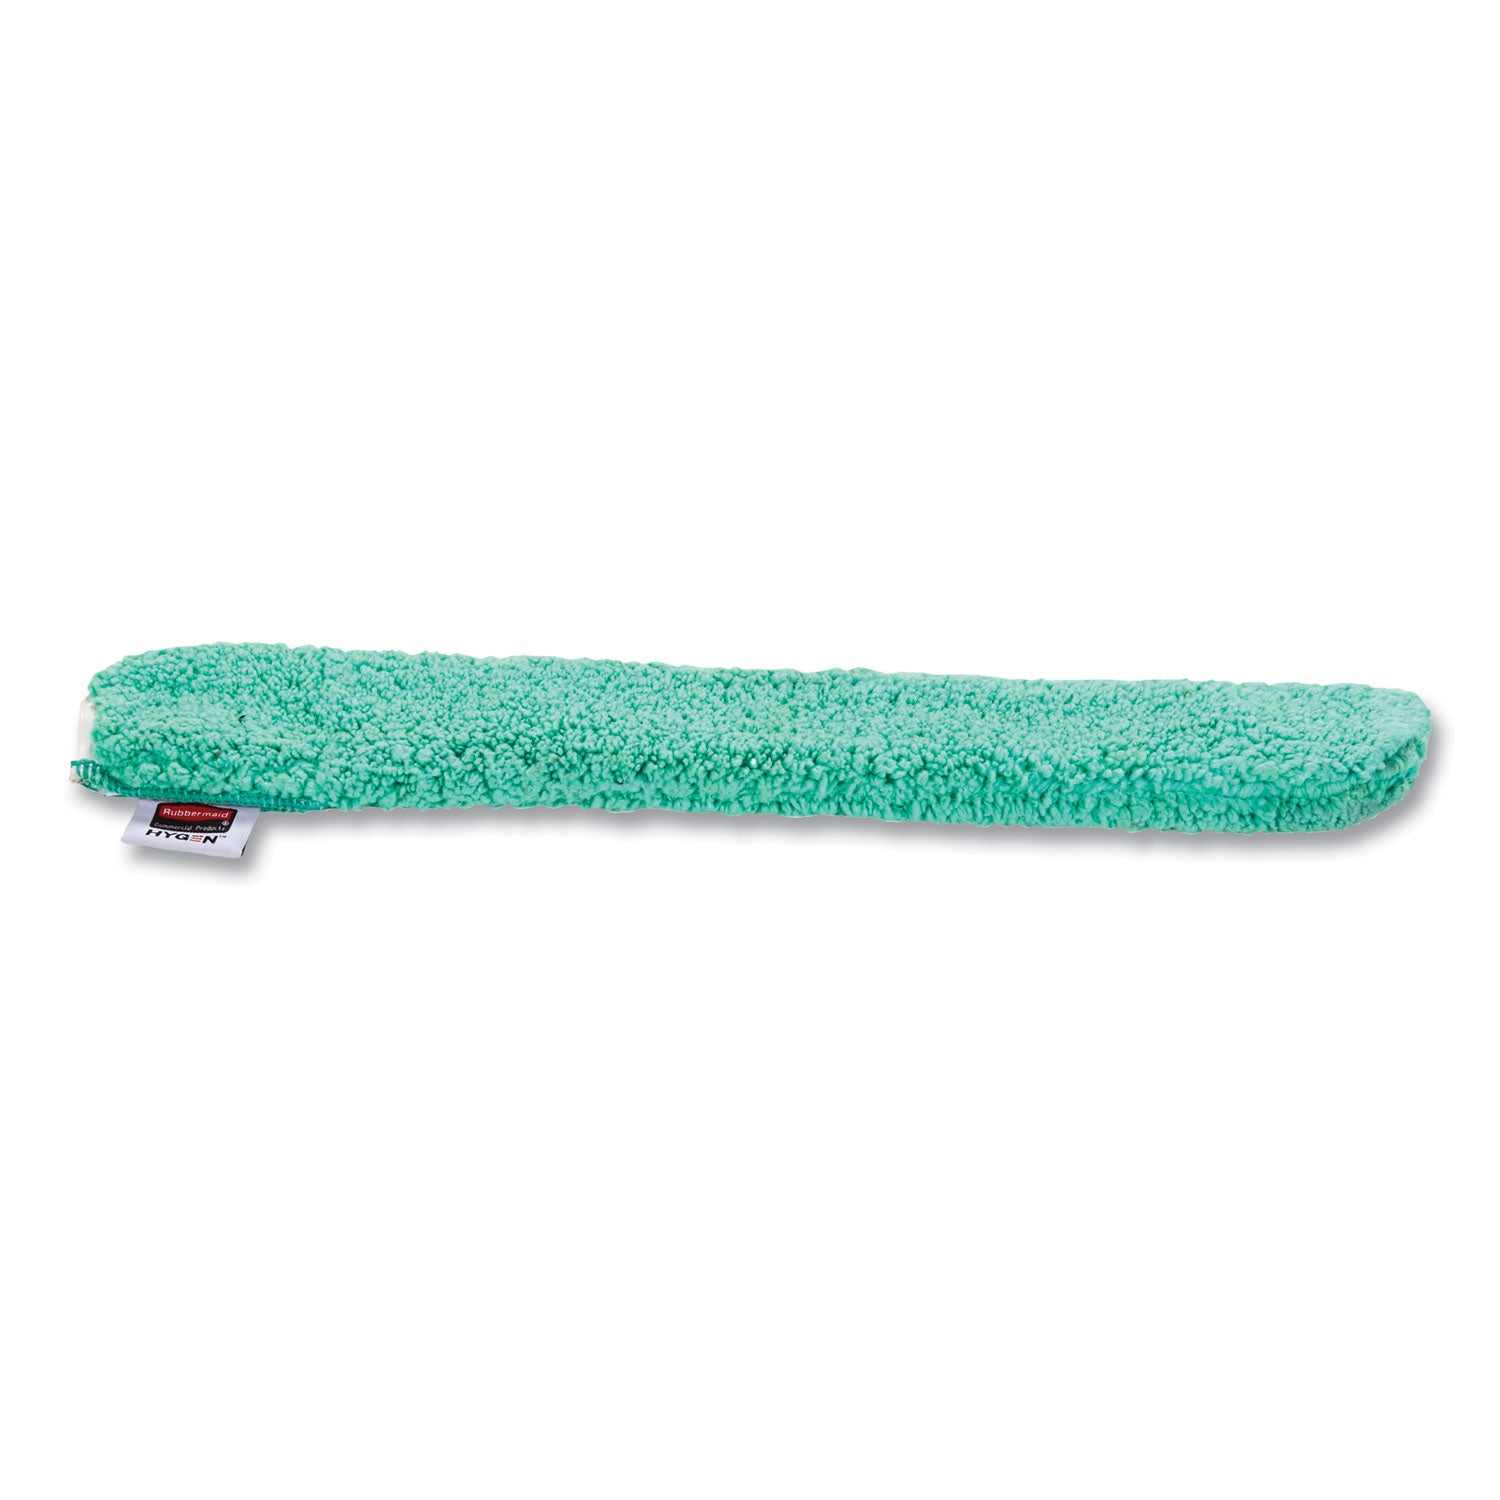 HYGEN Quick-Connect Microfiber Dusting Wand Sleeve, 22.7" x 3.25 - 